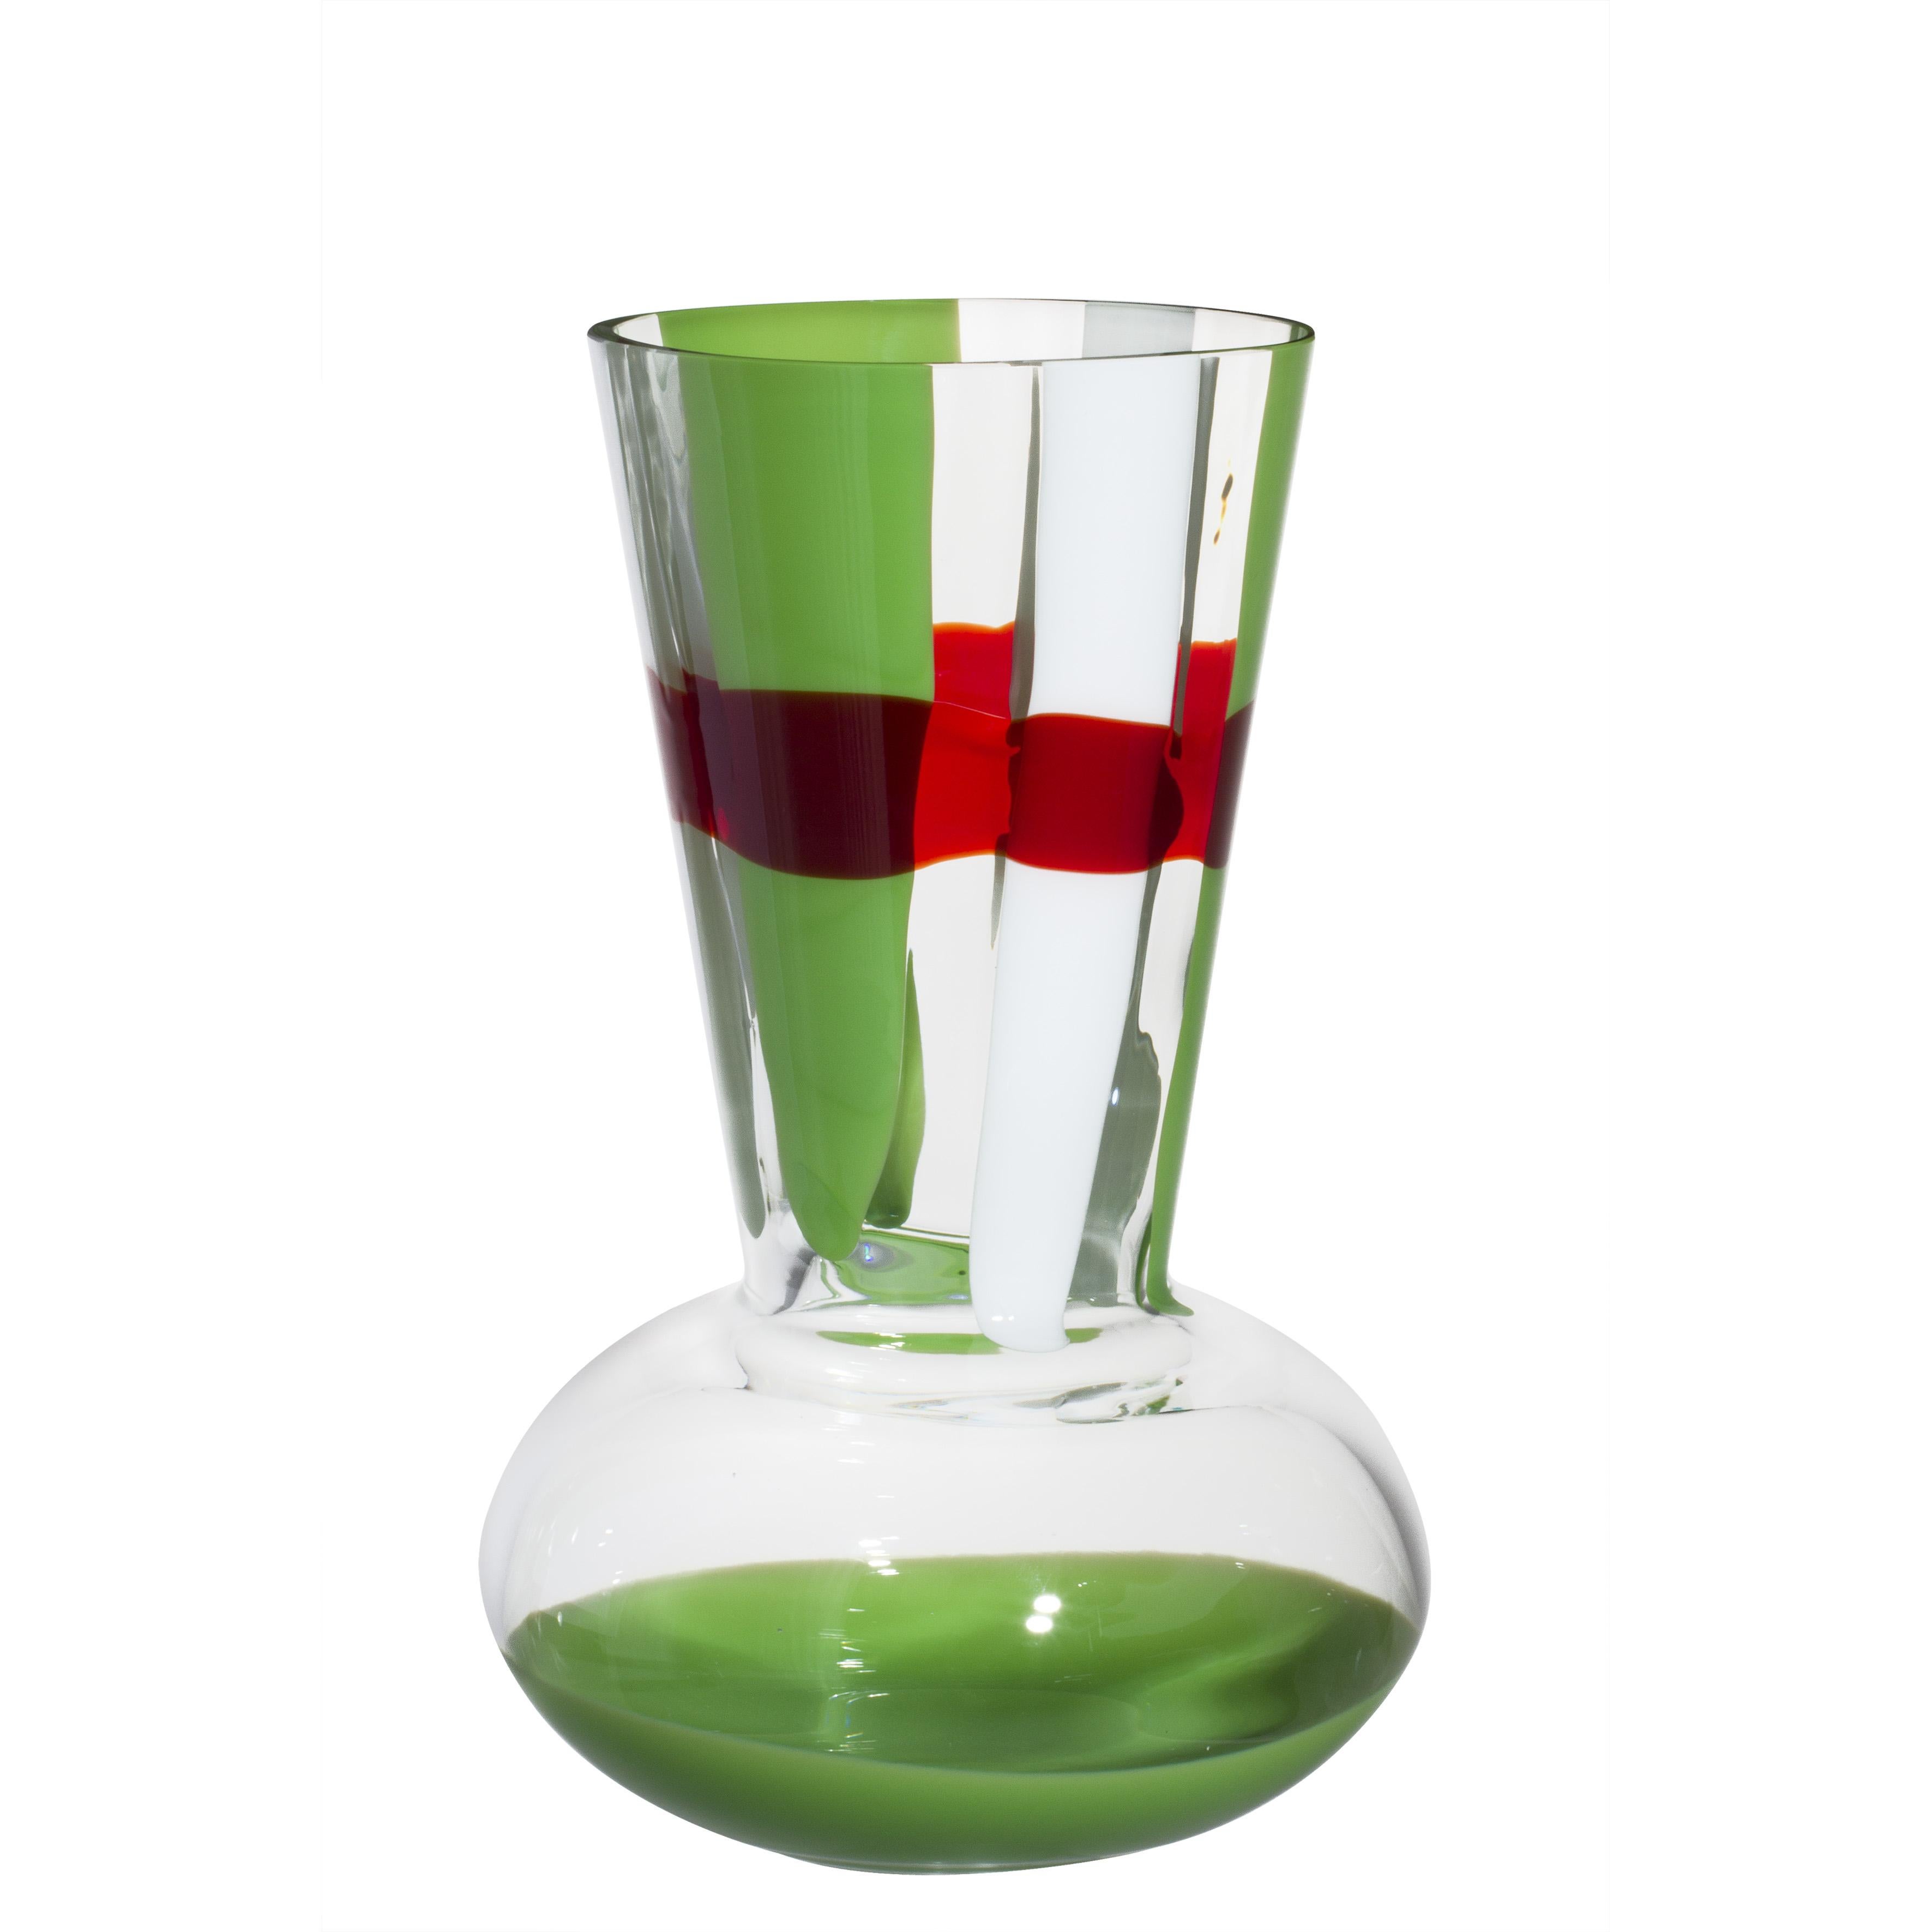 Medium Troncosfera Vase in Red, Green, and White by Carlo Moretti For Sale